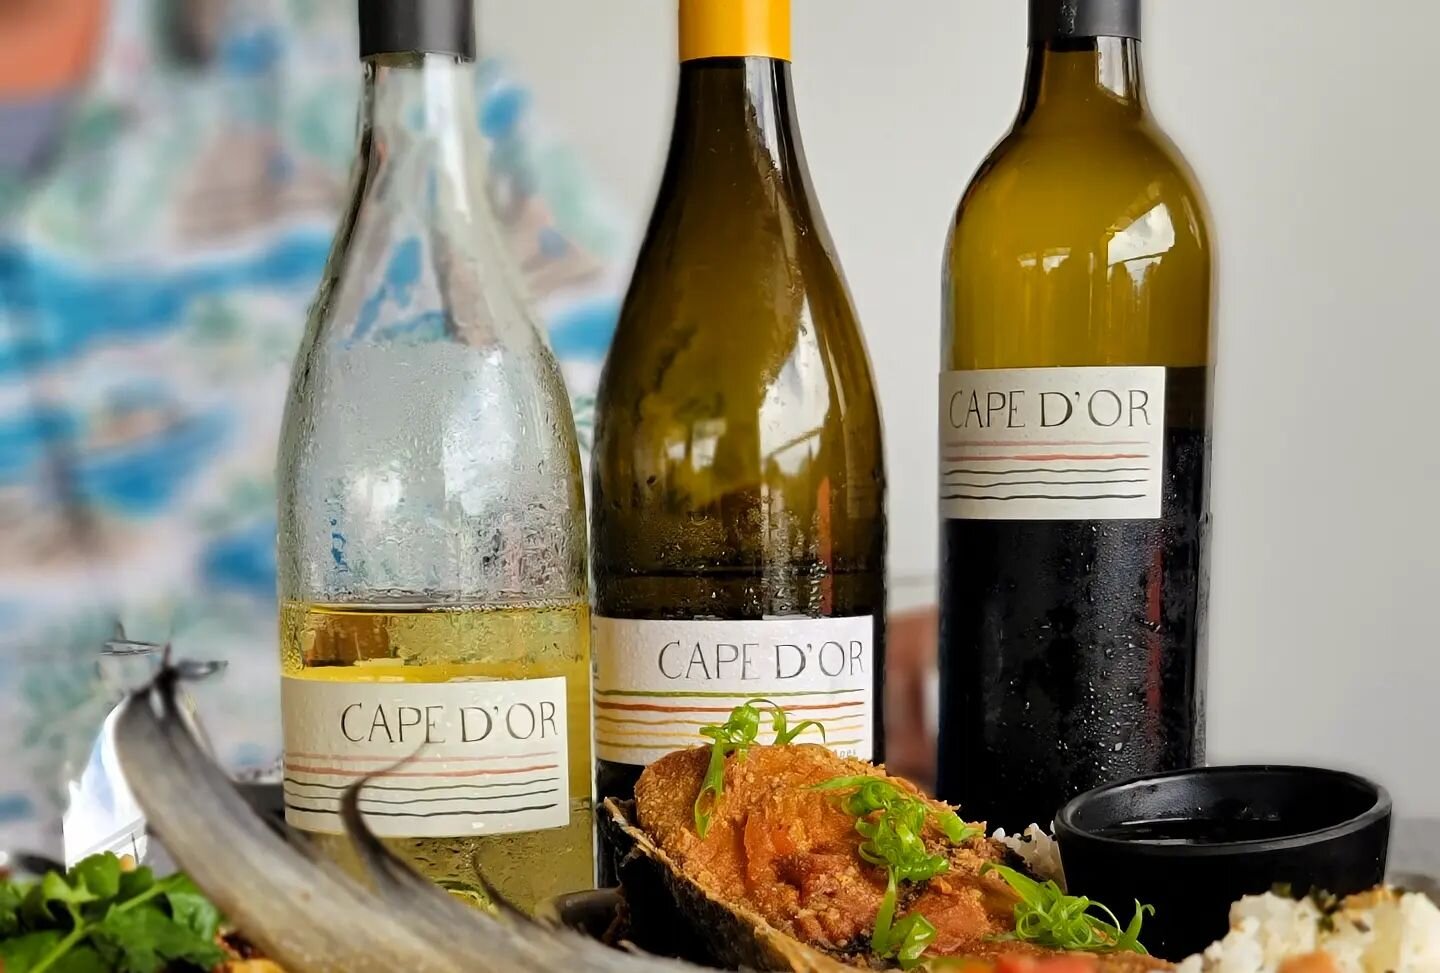 Fused a little bit of South Africa with Hawai'i. In case you were wondering- yes, South African Sauvignon Blanc and Chenin Blanc goes well with Ahi Collar and whole fried fish. @cape_dor_wines